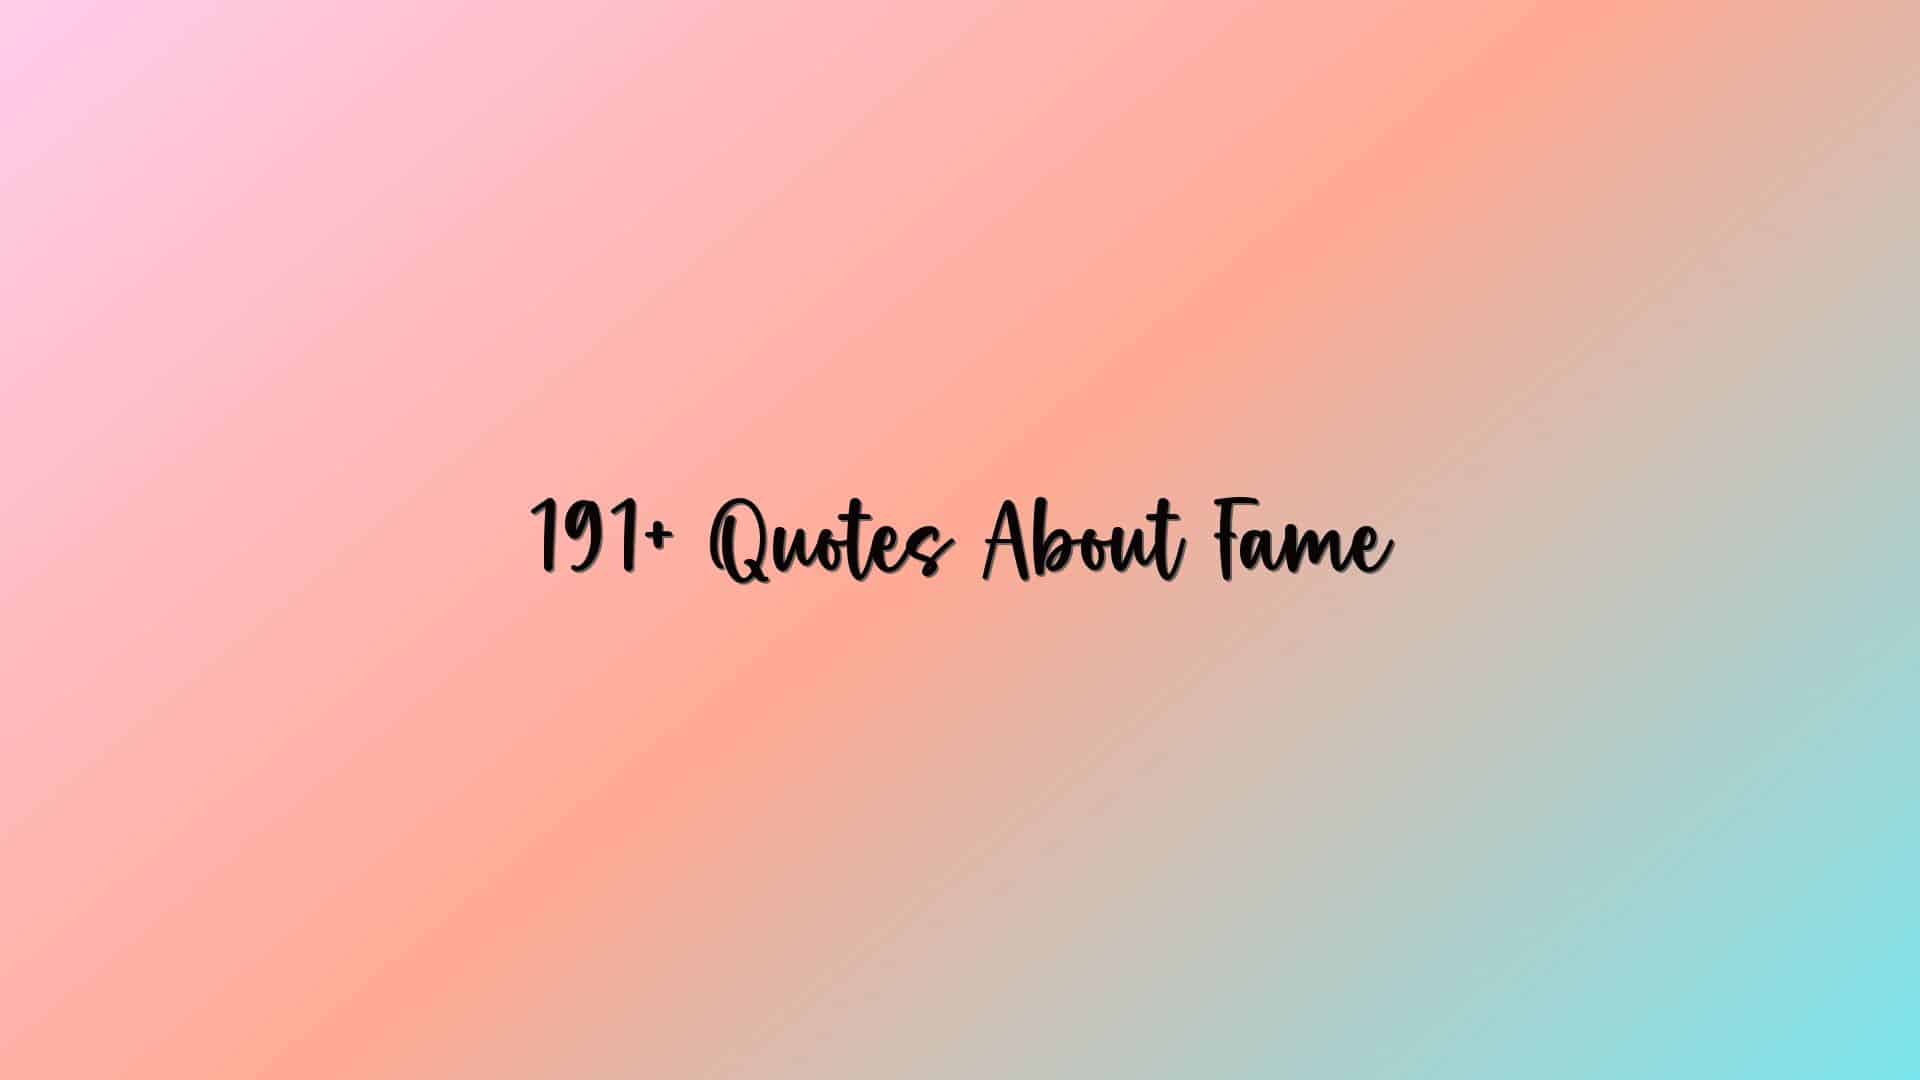 191+ Quotes About Fame